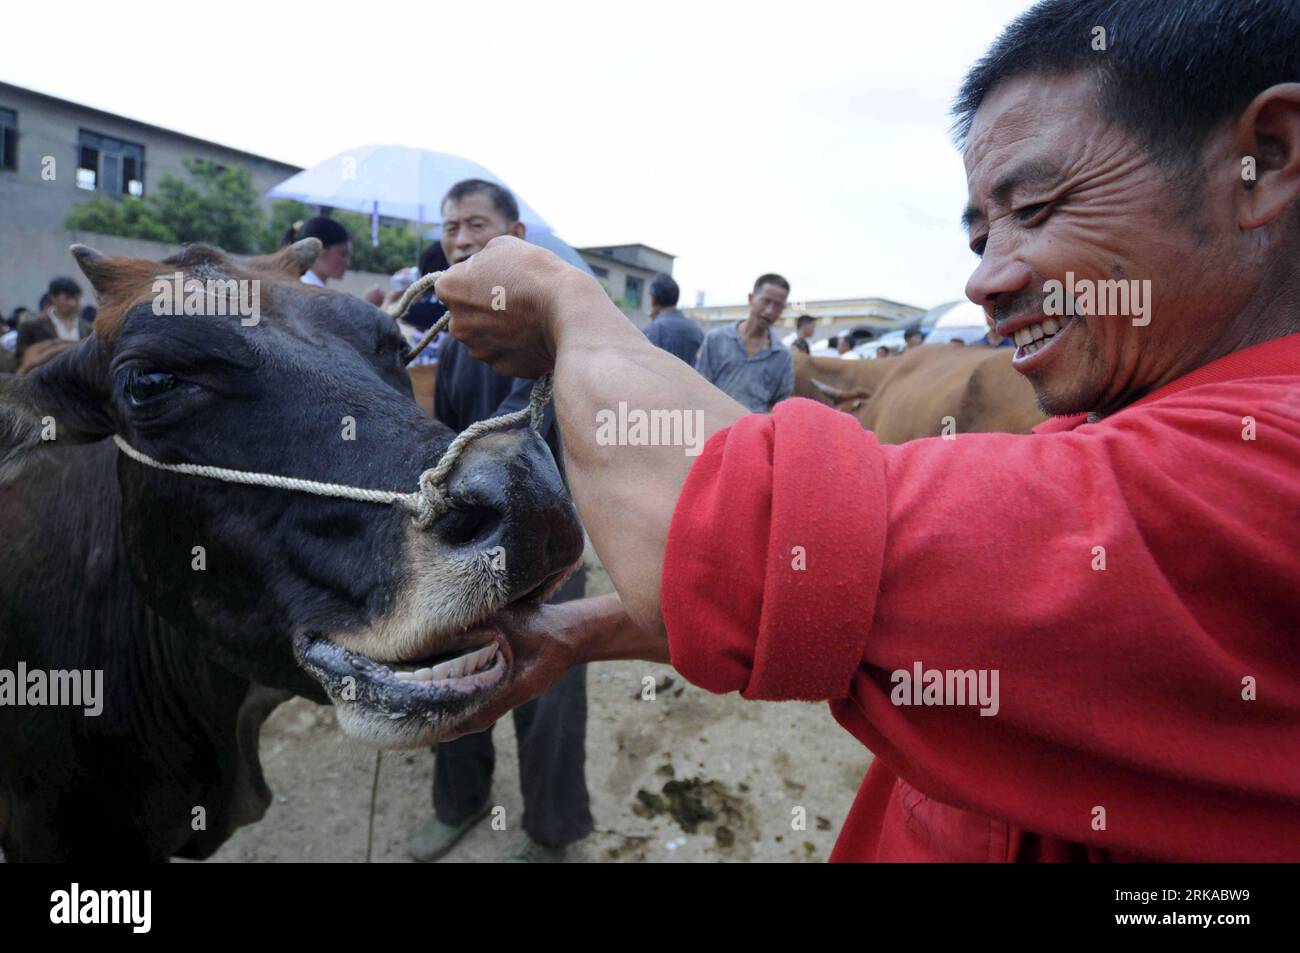 Bildnummer: 54300179  Datum: 15.08.2010  Copyright: imago/Xinhua (100816) -- ANSHUN, Aug. 16, 2010 (Xinhua) -- A trader inspects the teeth of a cattle on a country fair in Huajiang Township of Anshun City, southwest China s Guizhou Province, Aug. 15, 2010. Huajiang country fair of trading cattles, which has a history of over 300 years, is now famous and attracts more and more traders from the nearby provinces of Shaanxi, Yunan, Sichuan and Hunan. (Xinhua/Qin Gang) (wyo) CHINA-GUIZHOU-HUAJIANG COUNTRY FAIR-CATTLE (CN) PUBLICATIONxNOTxINxCHN Wirtschaft Landwirtschaft Messe Landwirtschaftsmesse T Stock Photo